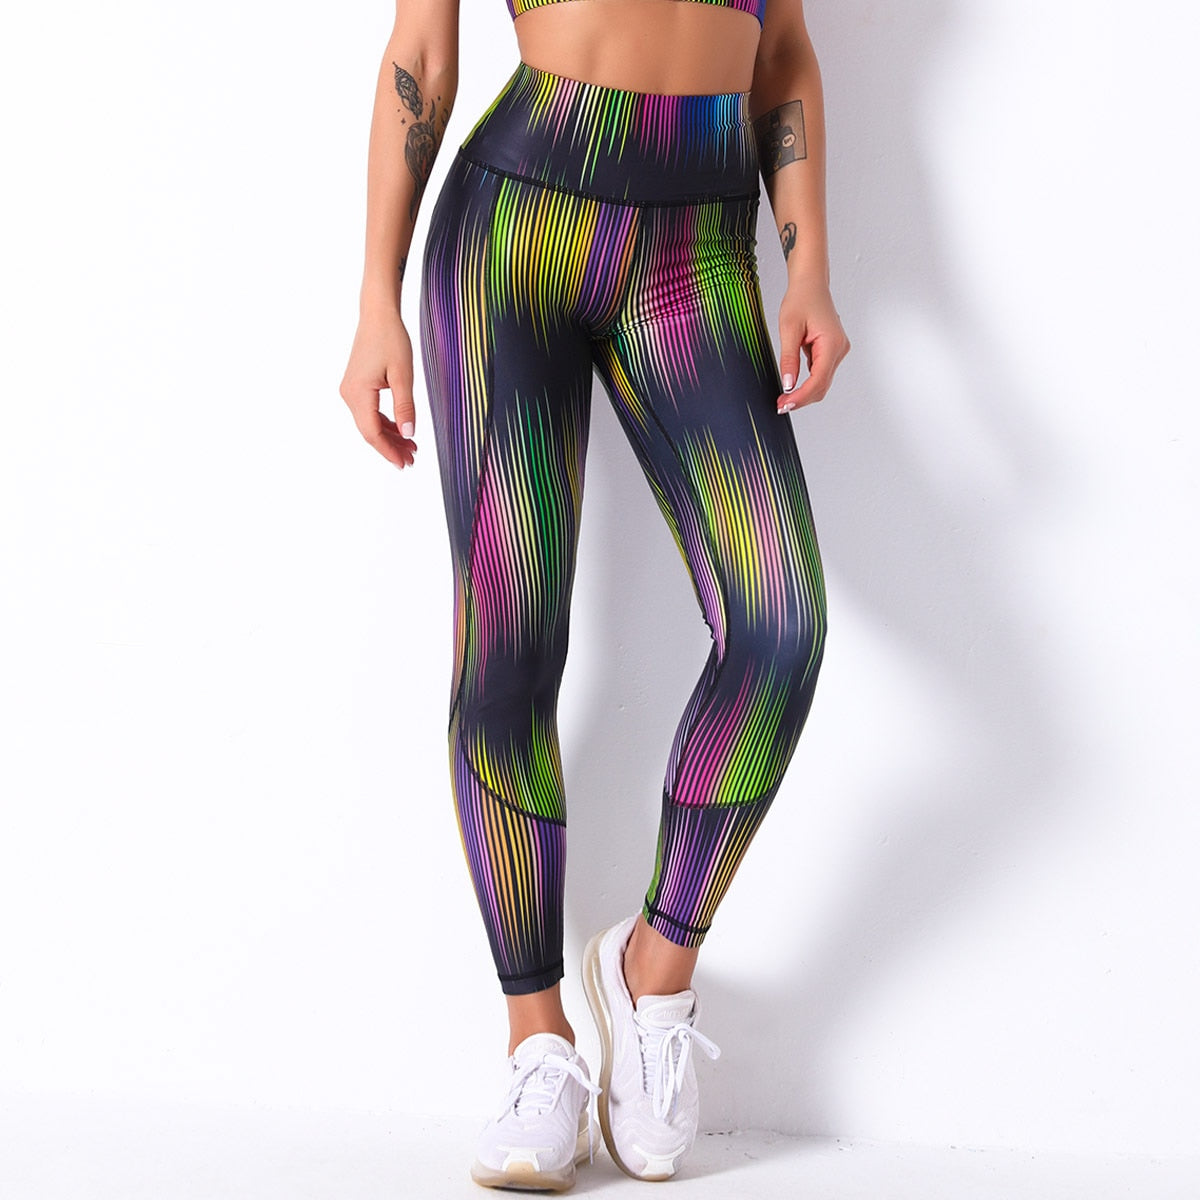 Fashion Sport Pants Women Colorful Digital Print High Waist Push Up Stretch Leggings Workout Outfit Fitness Gym Wear